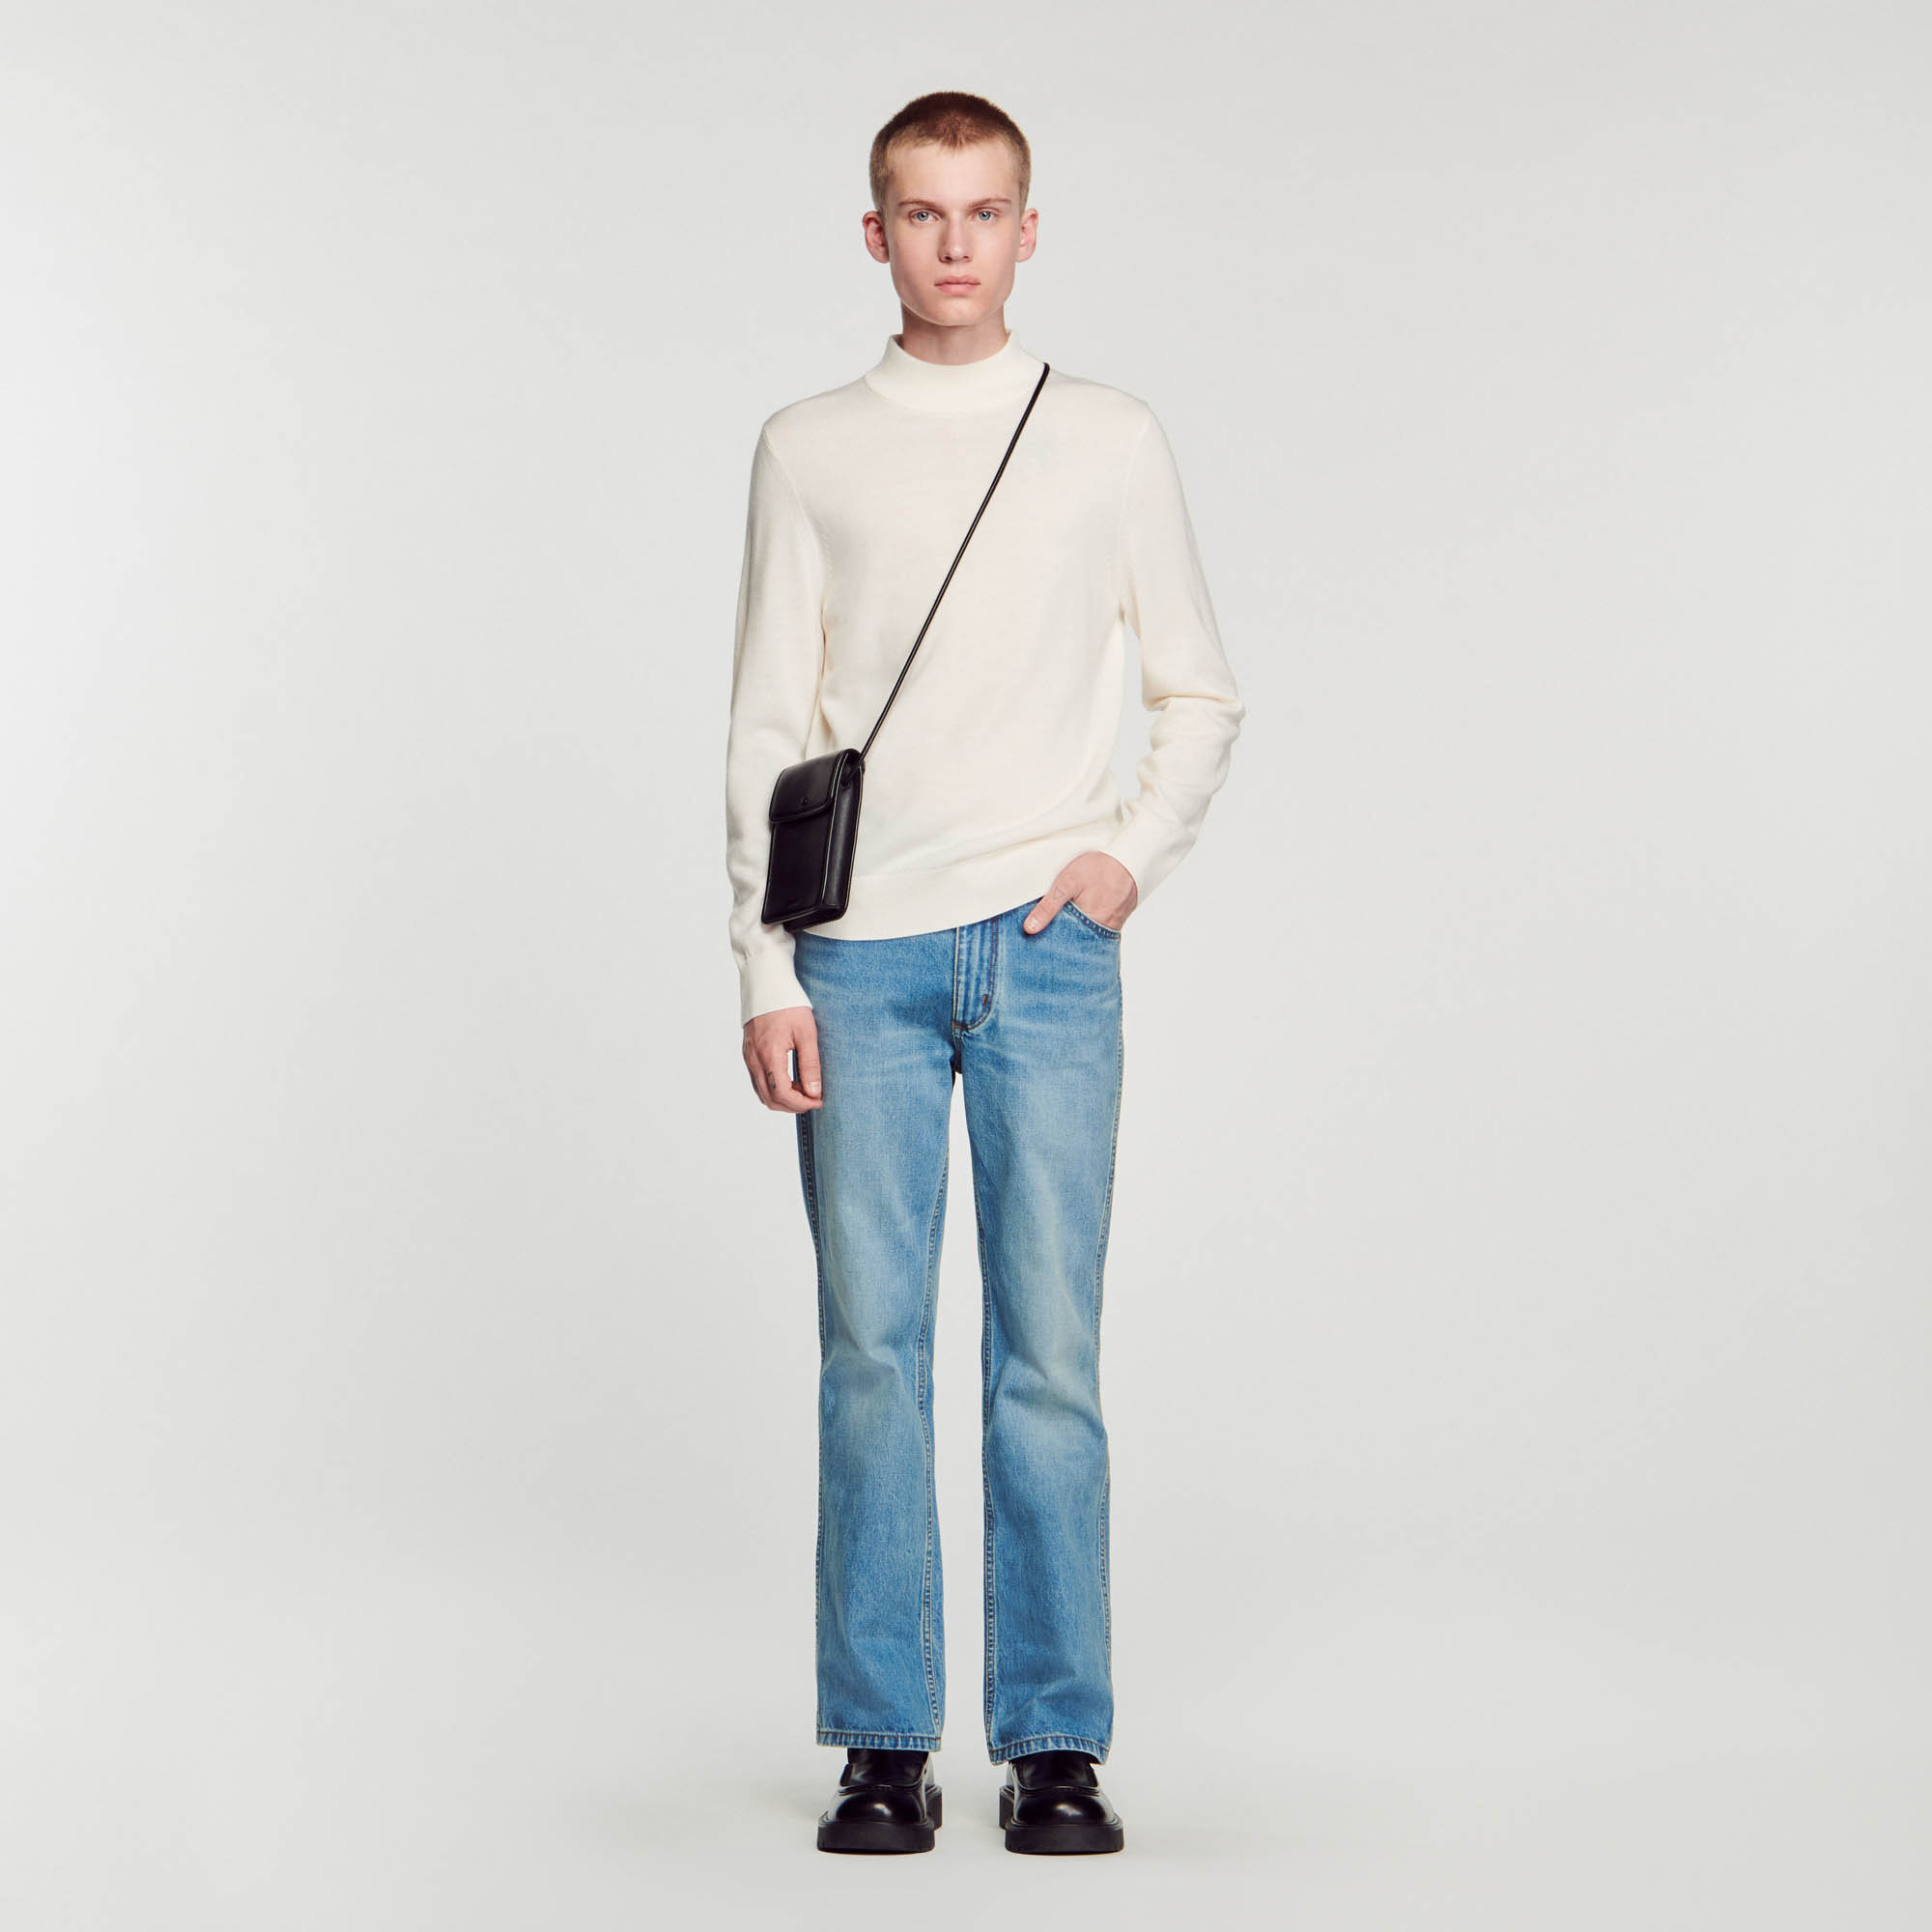 Sandro acrylic Wool sweater with long sleeves and a ribbed stand-up collar